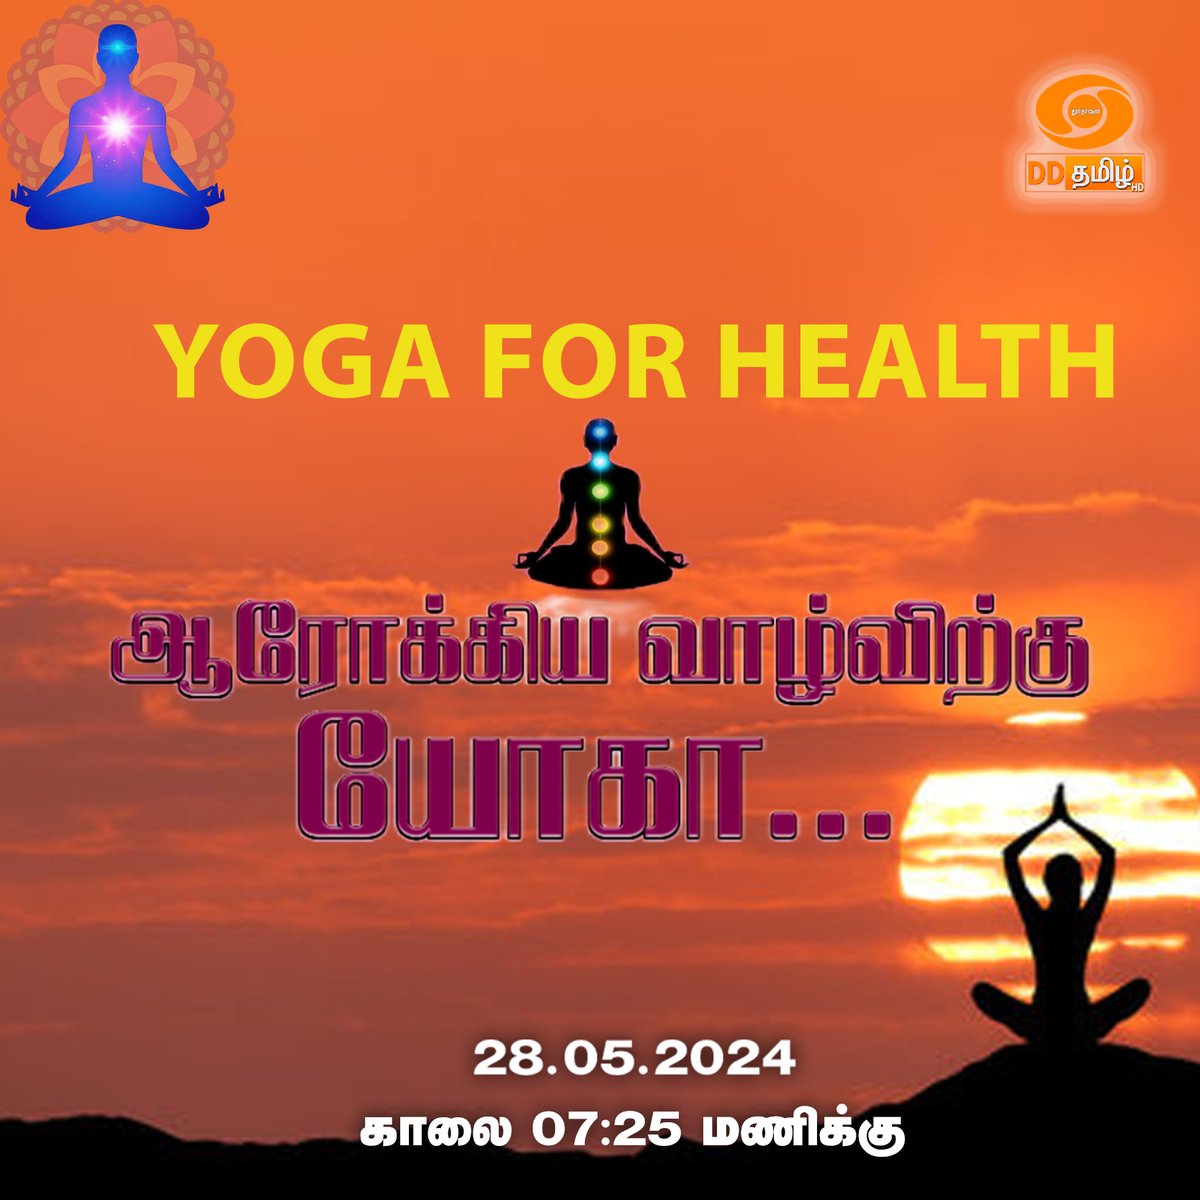 📷 Elevate your mornings with a splash of wellness! 📷 Dive into the serenity of 'Yoga for Health - Arokkiya Vaazhvirkku Yoga' Repeat Telecast on @DDTamilOfficial | daily at the zen o'clock of 7:25 AM
#ArokkiyaVaazhvirkkuYoga #DDtamilYoga #WellnessRituals #morningmantra